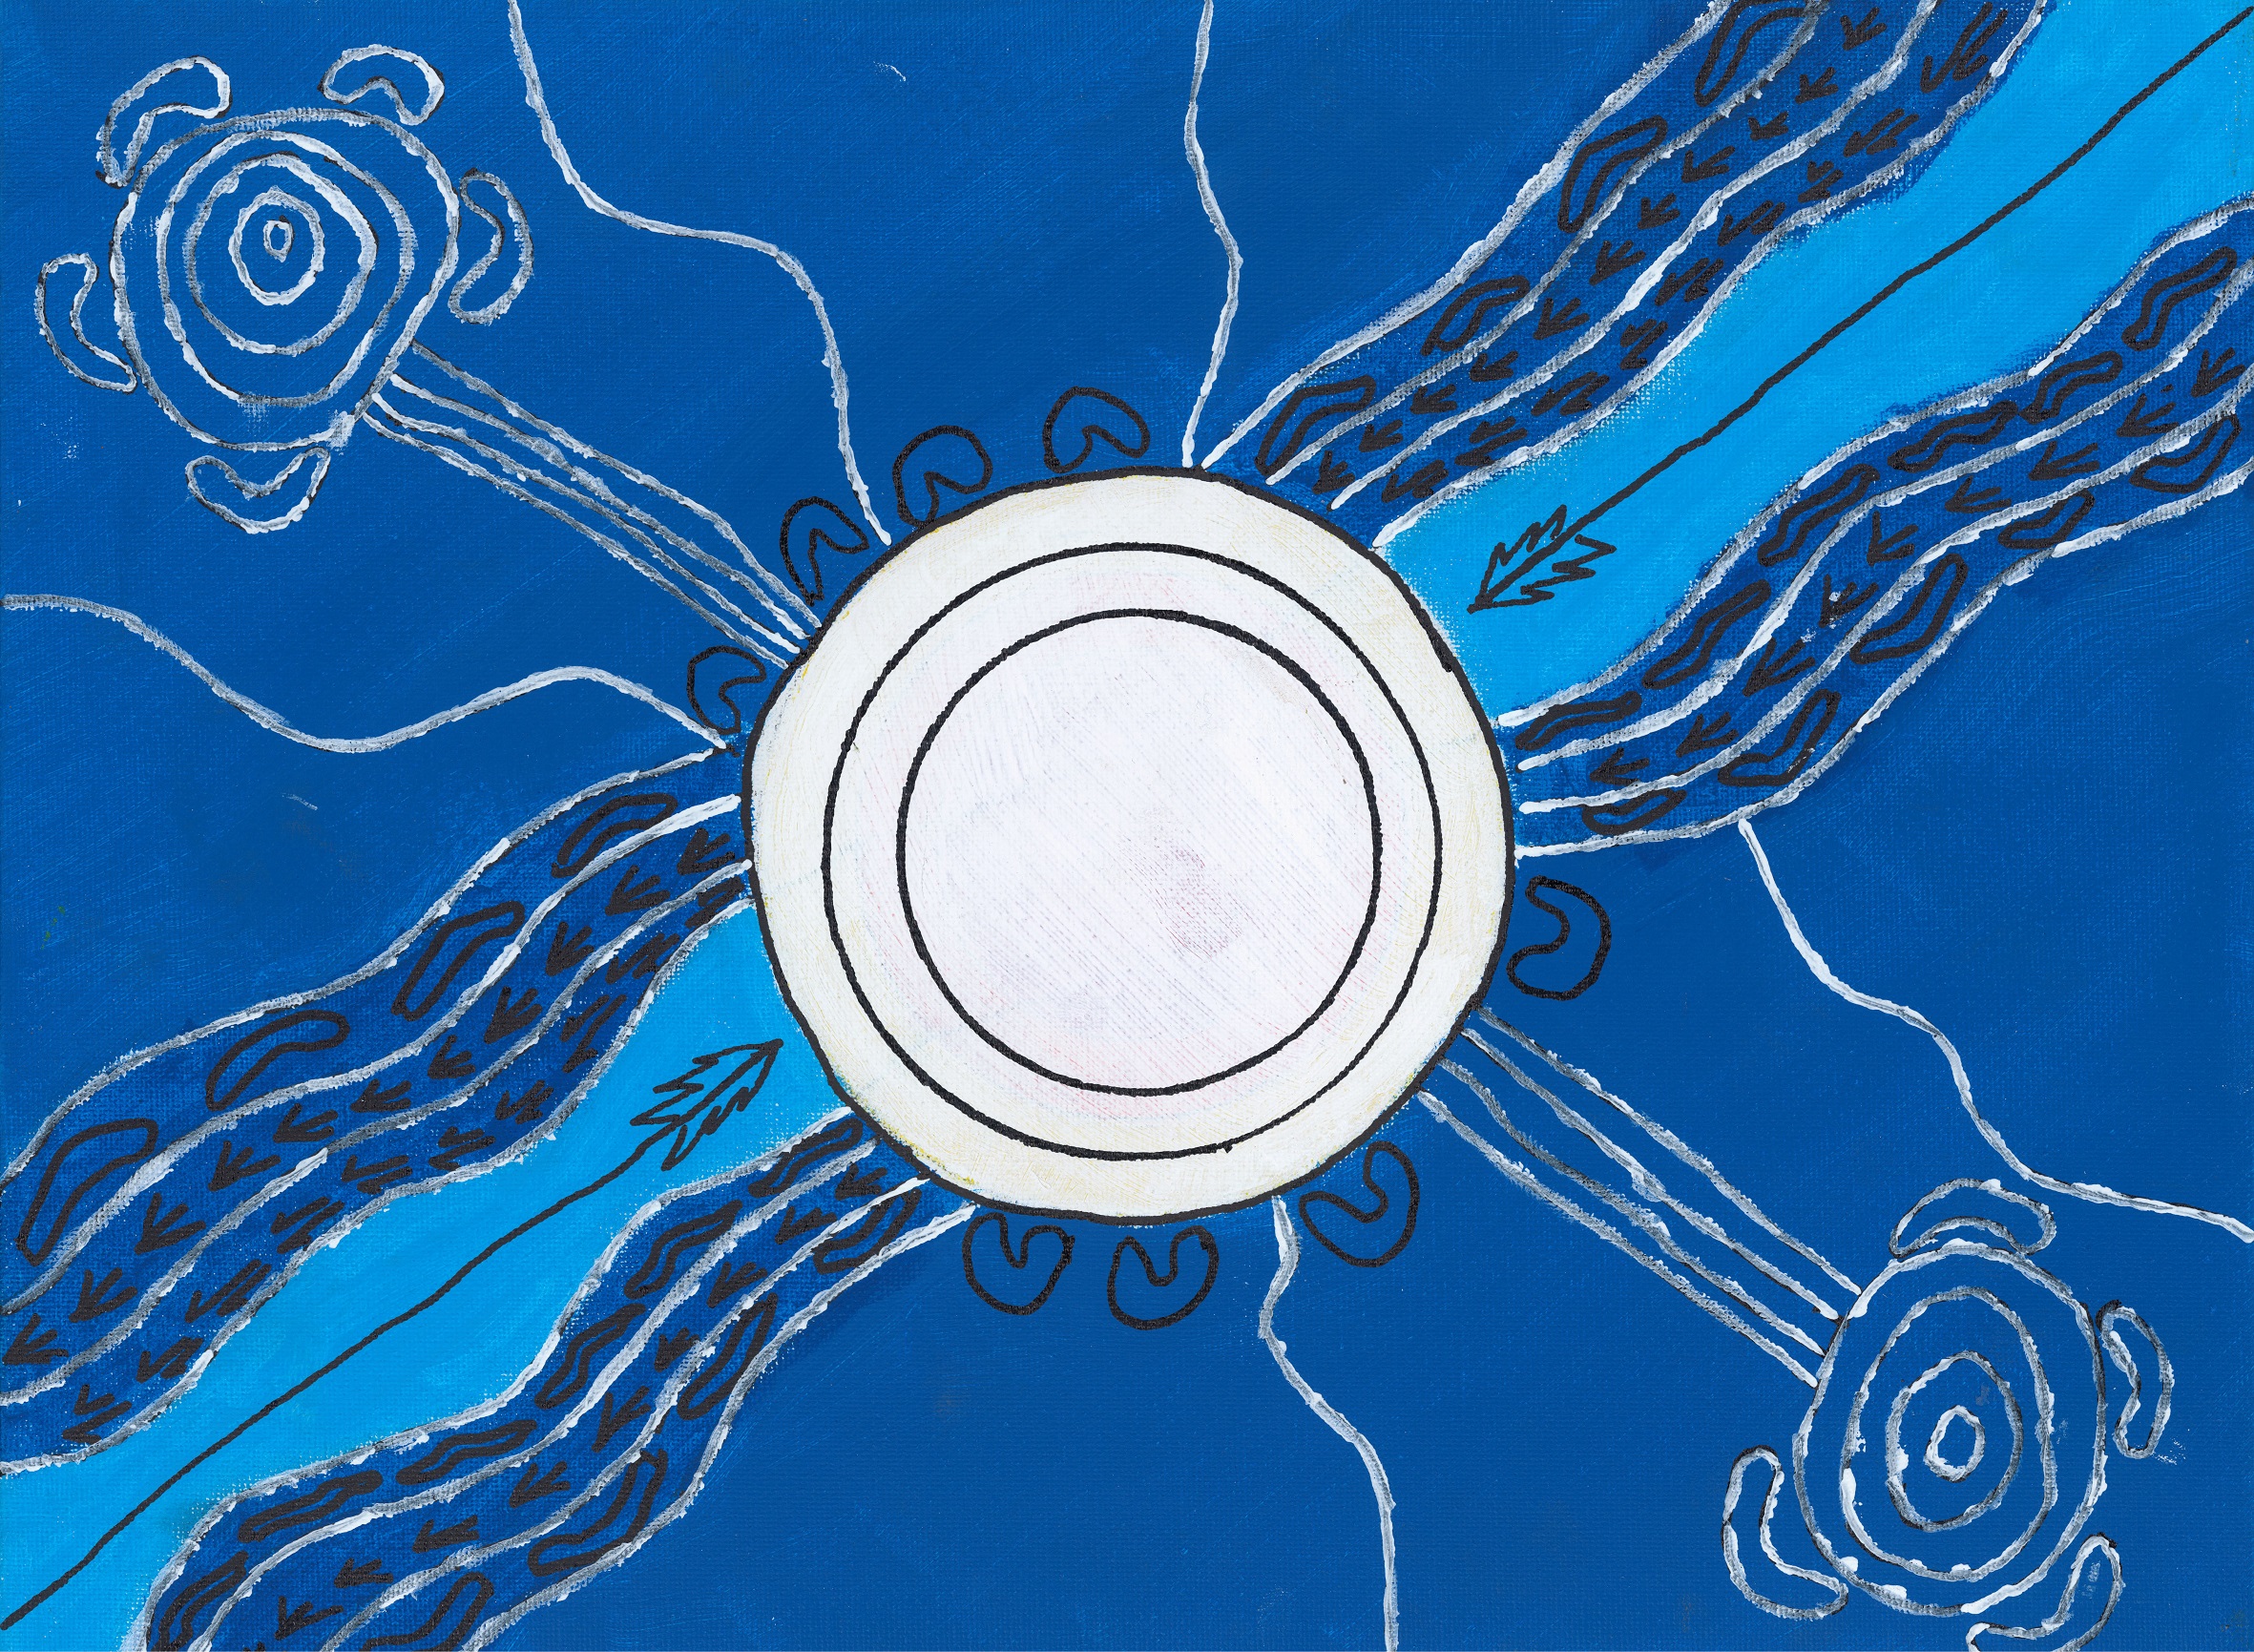 Aboriginal artwork depicting blue background, white circles inside each other to show next generations and a riverbank